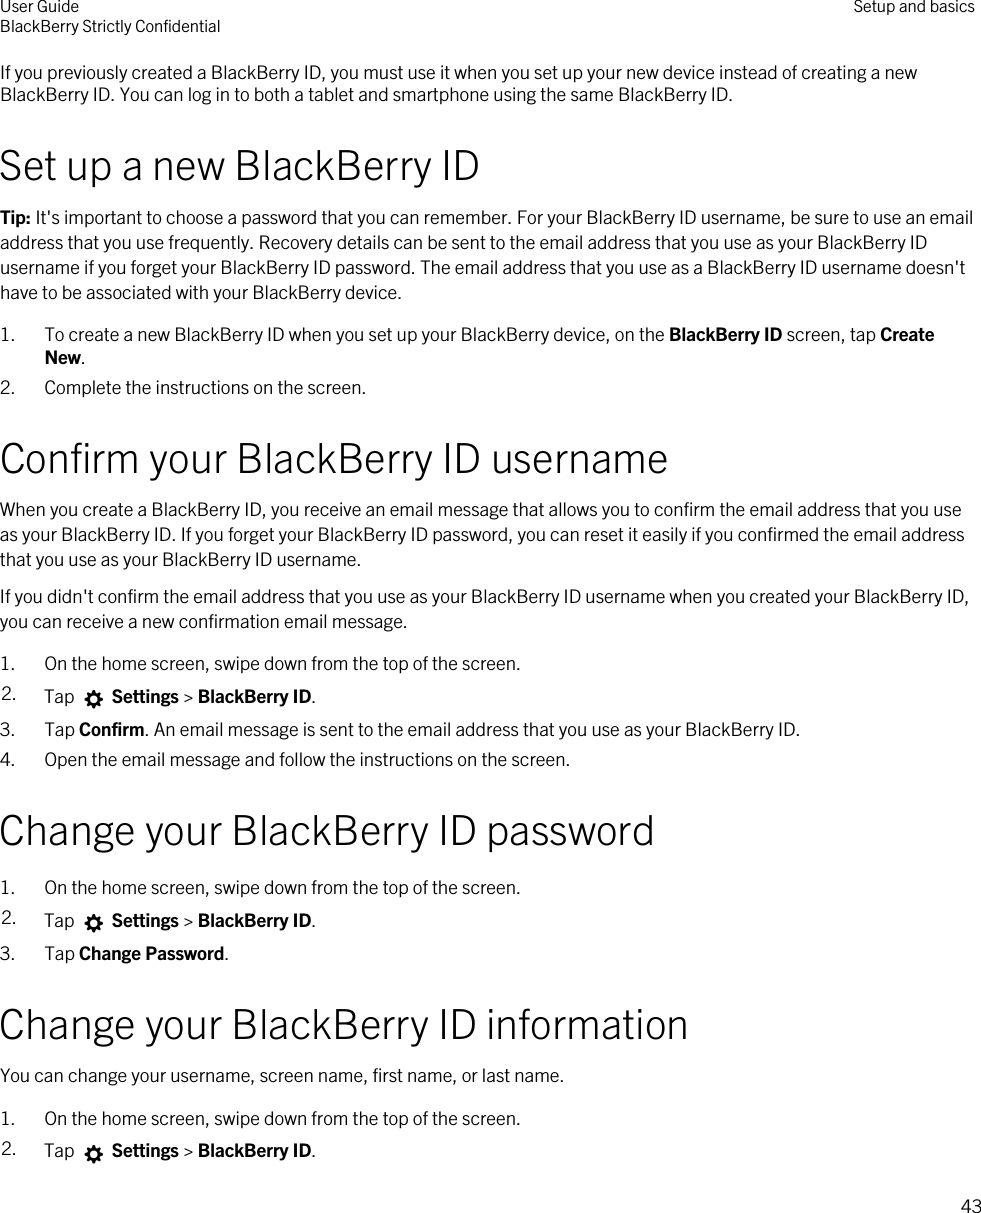 If you previously created a BlackBerry ID, you must use it when you set up your new device instead of creating a new BlackBerry ID. You can log in to both a tablet and smartphone using the same BlackBerry ID.Set up a new BlackBerry IDTip: It&apos;s important to choose a password that you can remember. For your BlackBerry ID username, be sure to use an email address that you use frequently. Recovery details can be sent to the email address that you use as your BlackBerry ID username if you forget your BlackBerry ID password. The email address that you use as a BlackBerry ID username doesn&apos;t have to be associated with your BlackBerry device.1. To create a new BlackBerry ID when you set up your BlackBerry device, on the BlackBerry ID screen, tap Create New.2. Complete the instructions on the screen.Confirm your BlackBerry ID usernameWhen you create a BlackBerry ID, you receive an email message that allows you to confirm the email address that you use as your BlackBerry ID. If you forget your BlackBerry ID password, you can reset it easily if you confirmed the email address that you use as your BlackBerry ID username.If you didn&apos;t confirm the email address that you use as your BlackBerry ID username when you created your BlackBerry ID, you can receive a new confirmation email message.1. On the home screen, swipe down from the top of the screen.2. Tap   Settings &gt; BlackBerry ID.3. Tap Confirm. An email message is sent to the email address that you use as your BlackBerry ID.4. Open the email message and follow the instructions on the screen.Change your BlackBerry ID password1. On the home screen, swipe down from the top of the screen.2. Tap   Settings &gt; BlackBerry ID.3. Tap Change Password.Change your BlackBerry ID informationYou can change your username, screen name, first name, or last name.1. On the home screen, swipe down from the top of the screen.2. Tap   Settings &gt; BlackBerry ID.User GuideBlackBerry Strictly Confidential Setup and basics43